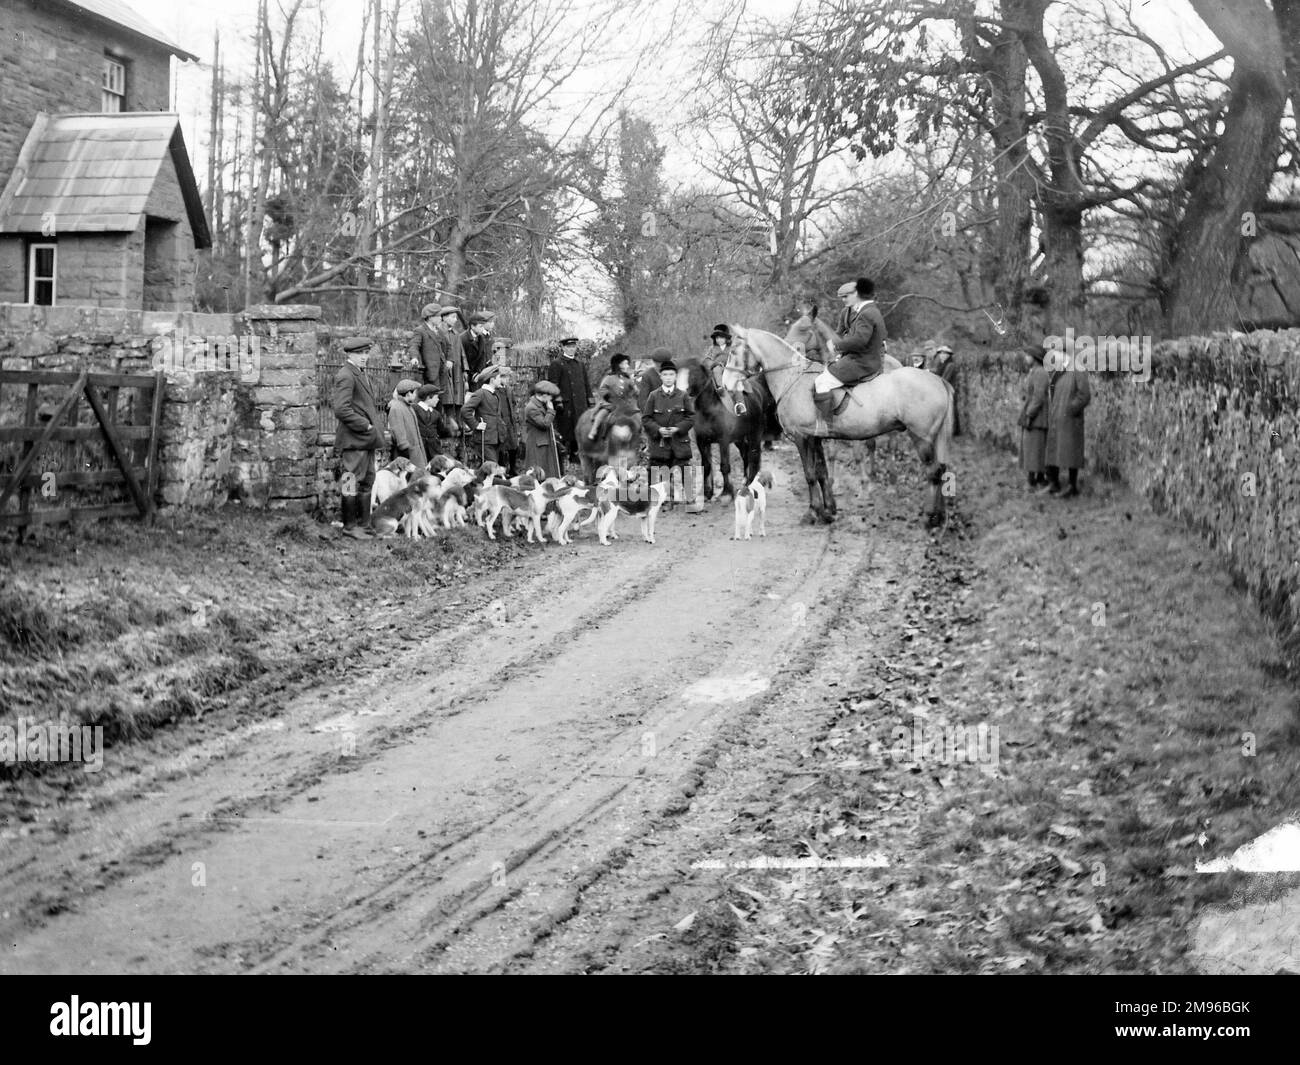 Members of the Crickhowell Hunt with horses and hounds on a country lane near Crickhowell, Powys, Mid Wales. Stock Photo